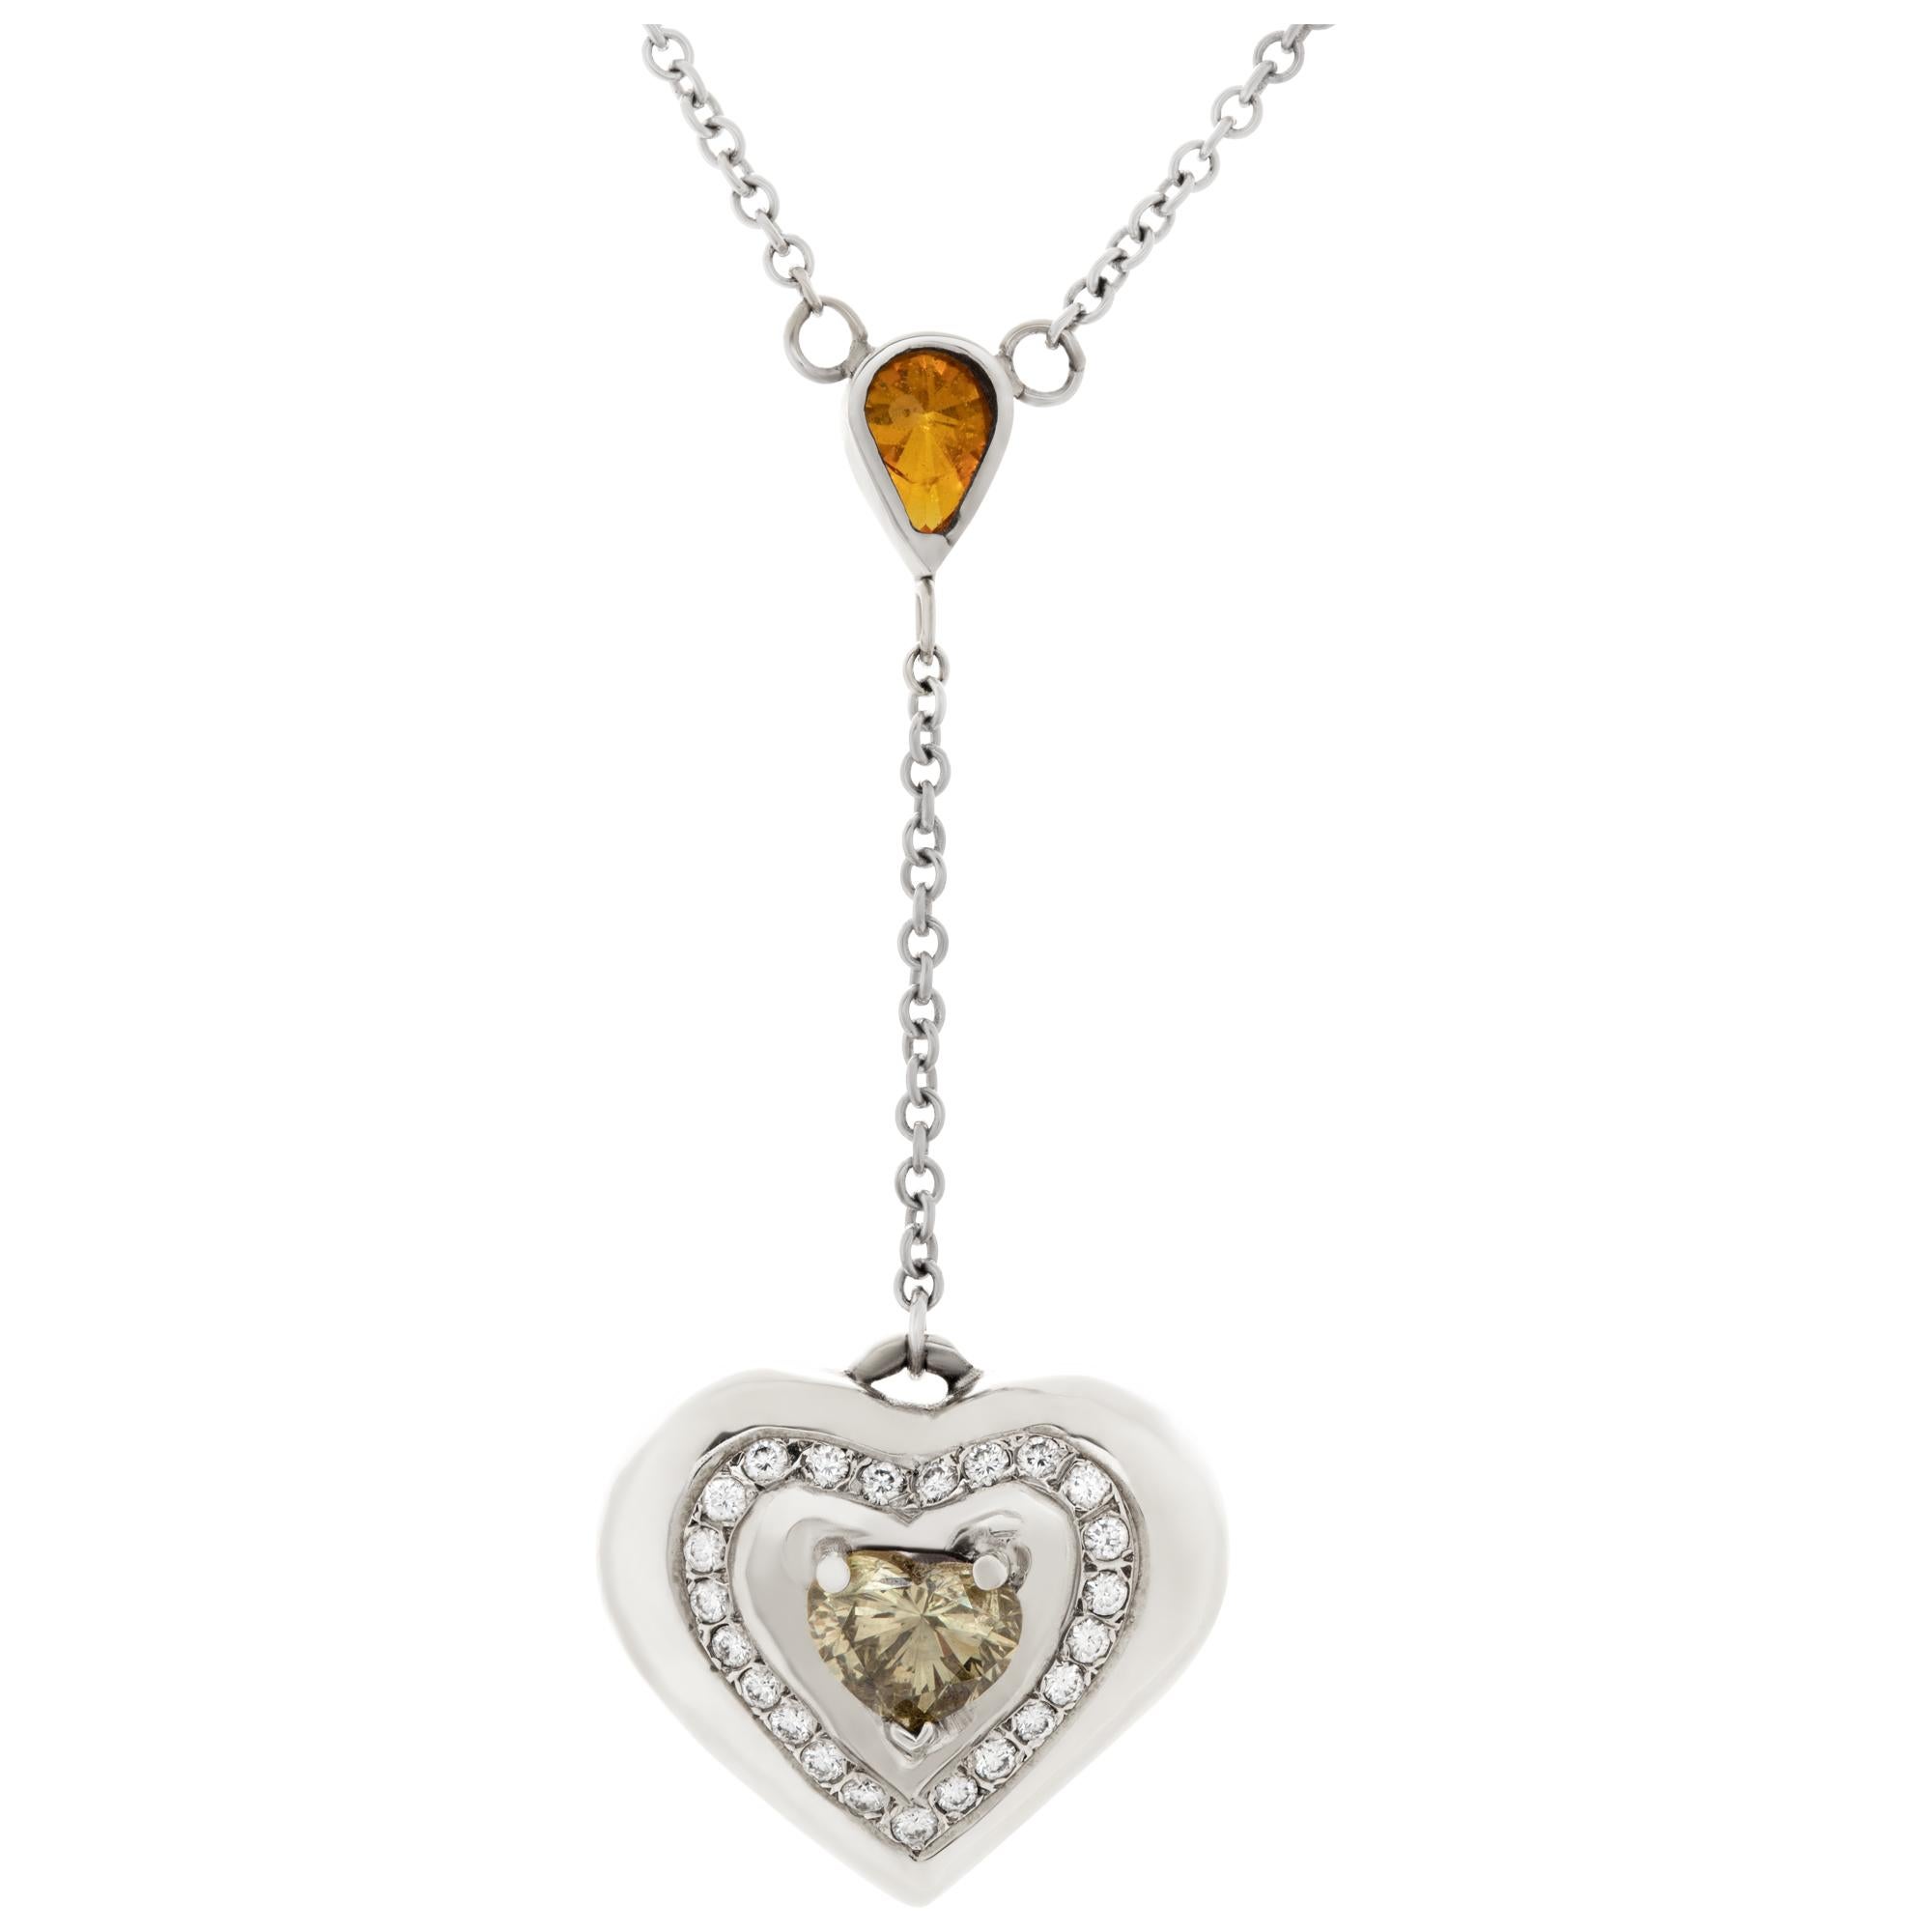 Diamond heart pendant necklace in 18k white gold In Excellent Condition For Sale In Surfside, FL